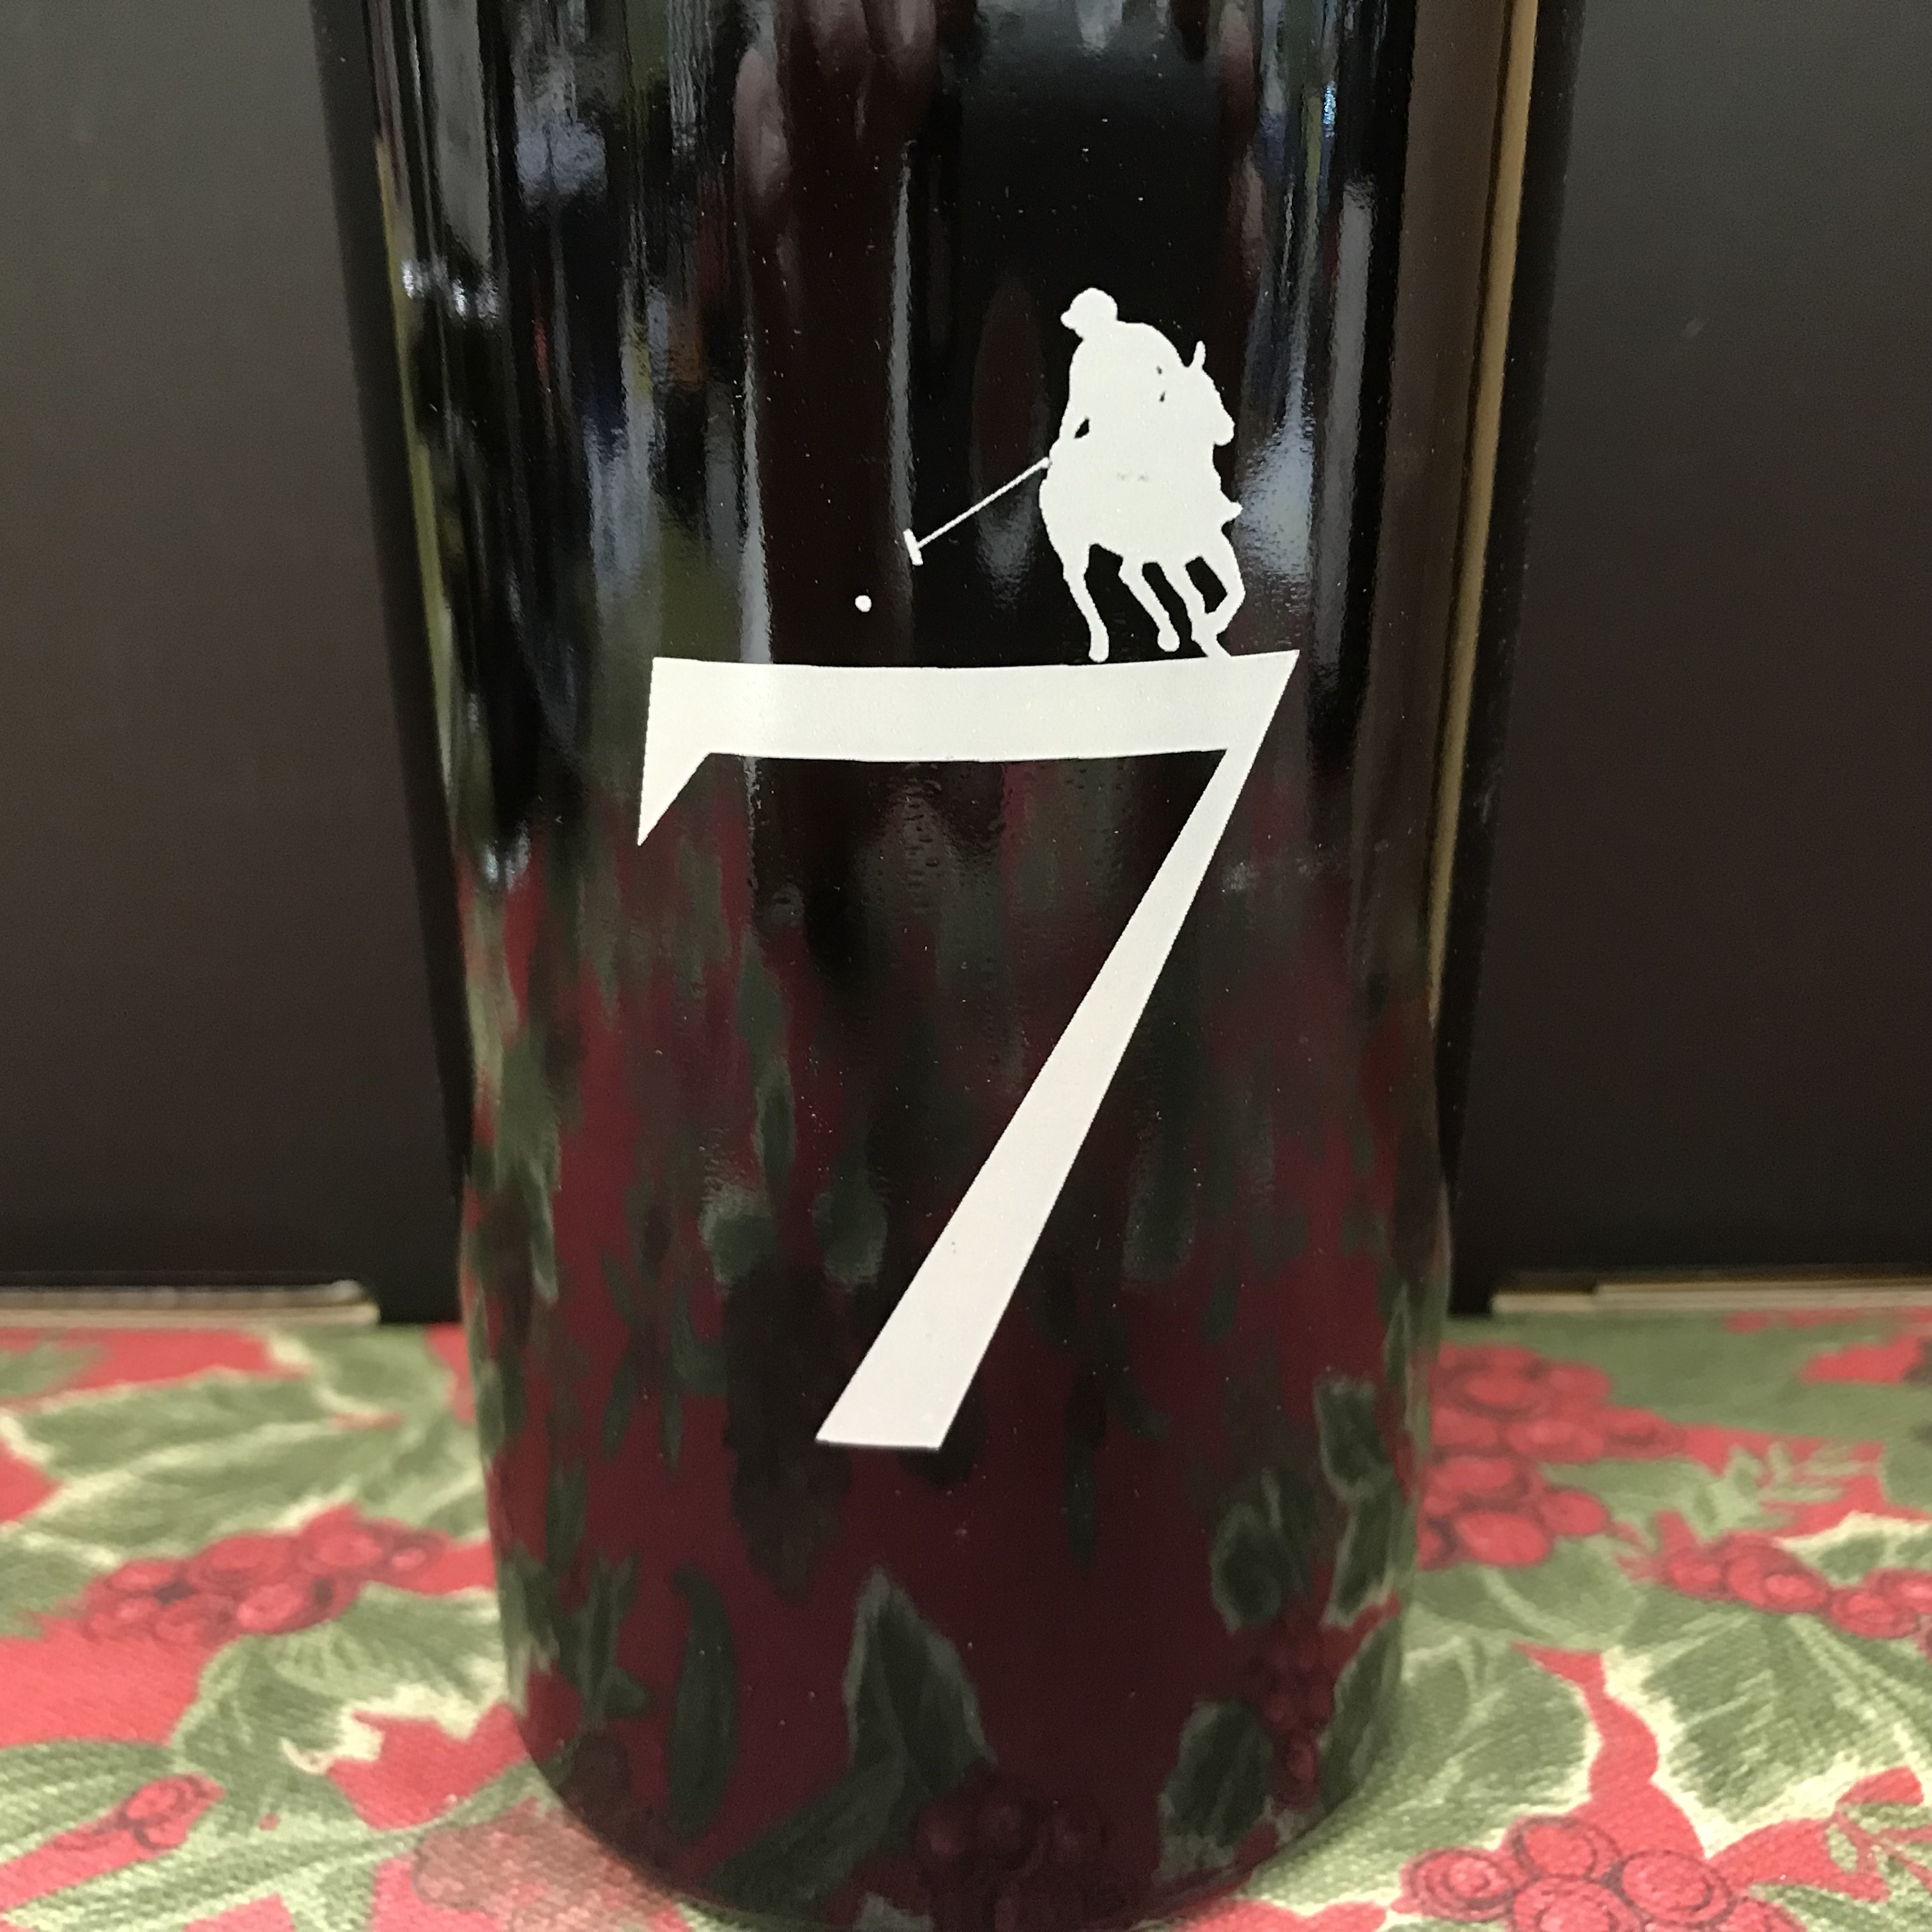 King Family 7 (seven) port style red wine 2018